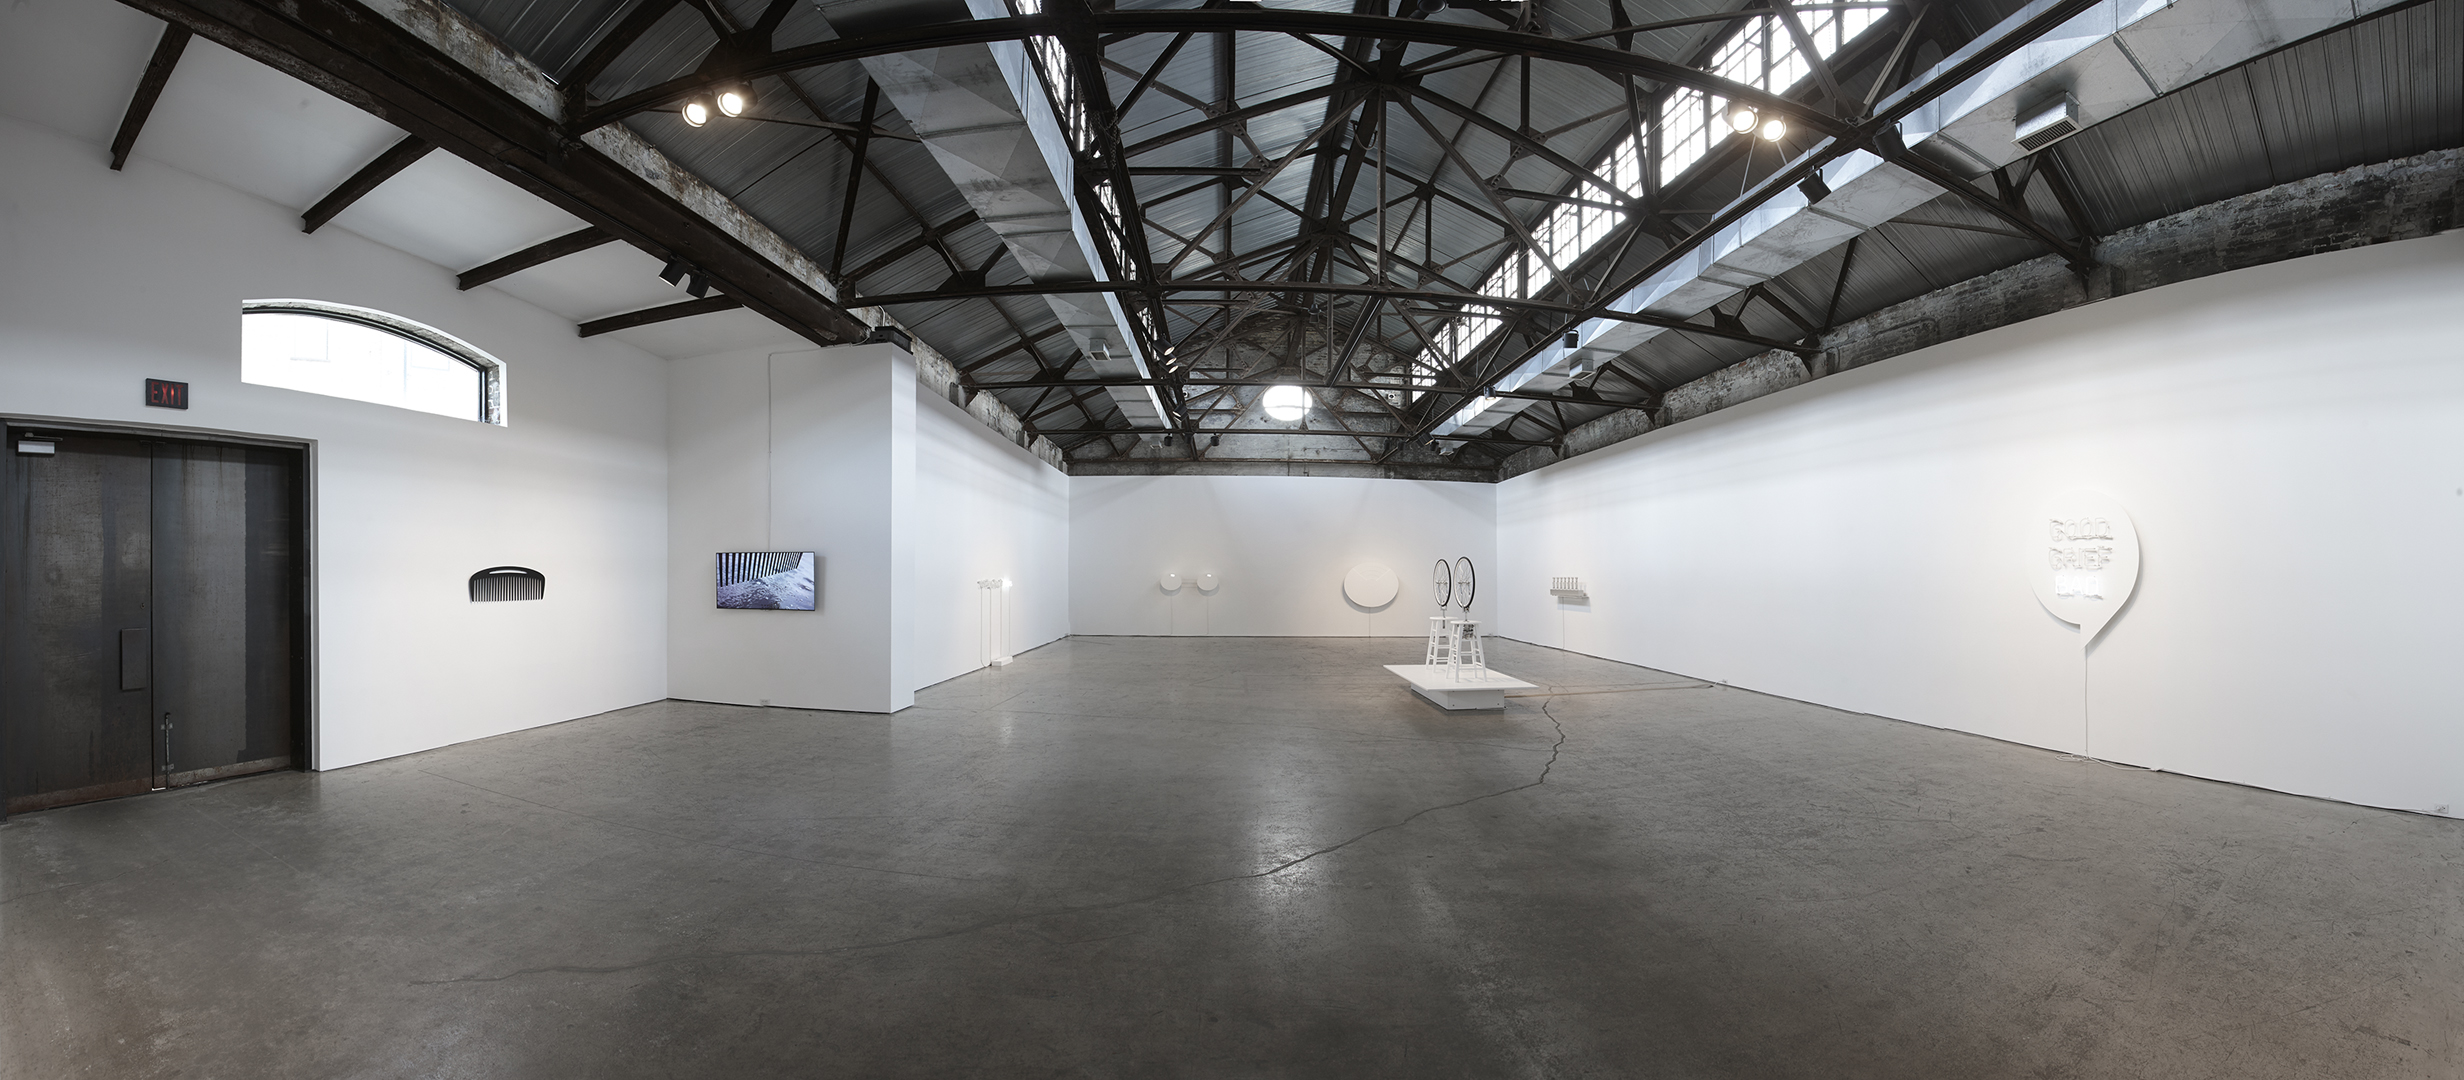 Installation View 1 text, combs wheels & poems 2015